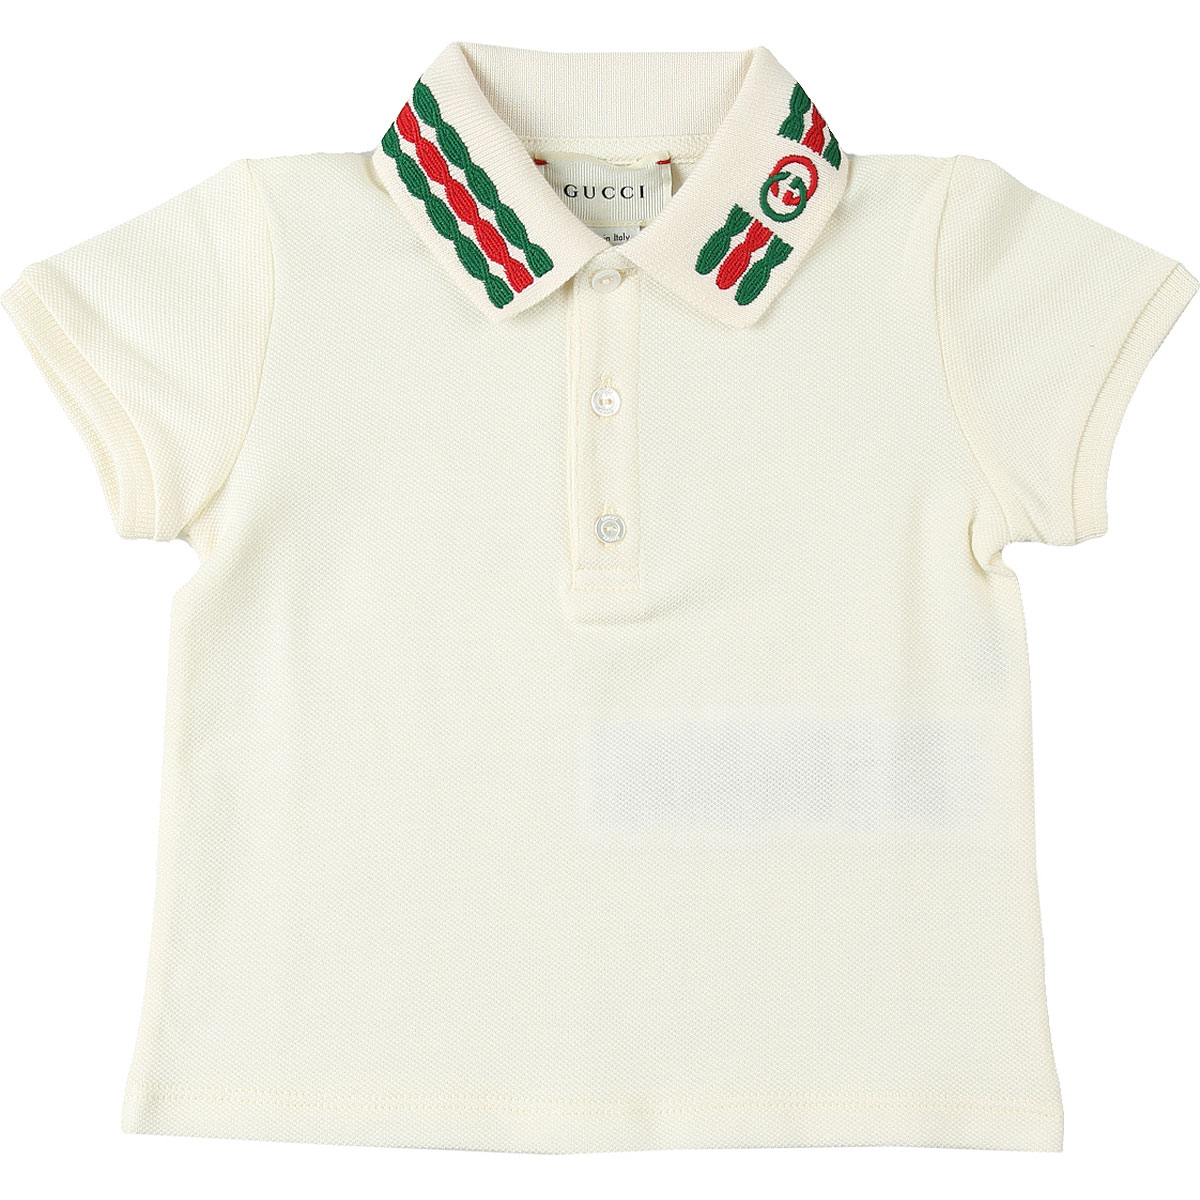 Baby Boy Clothing Gucci, Style code: 596160-xjb3d-9381